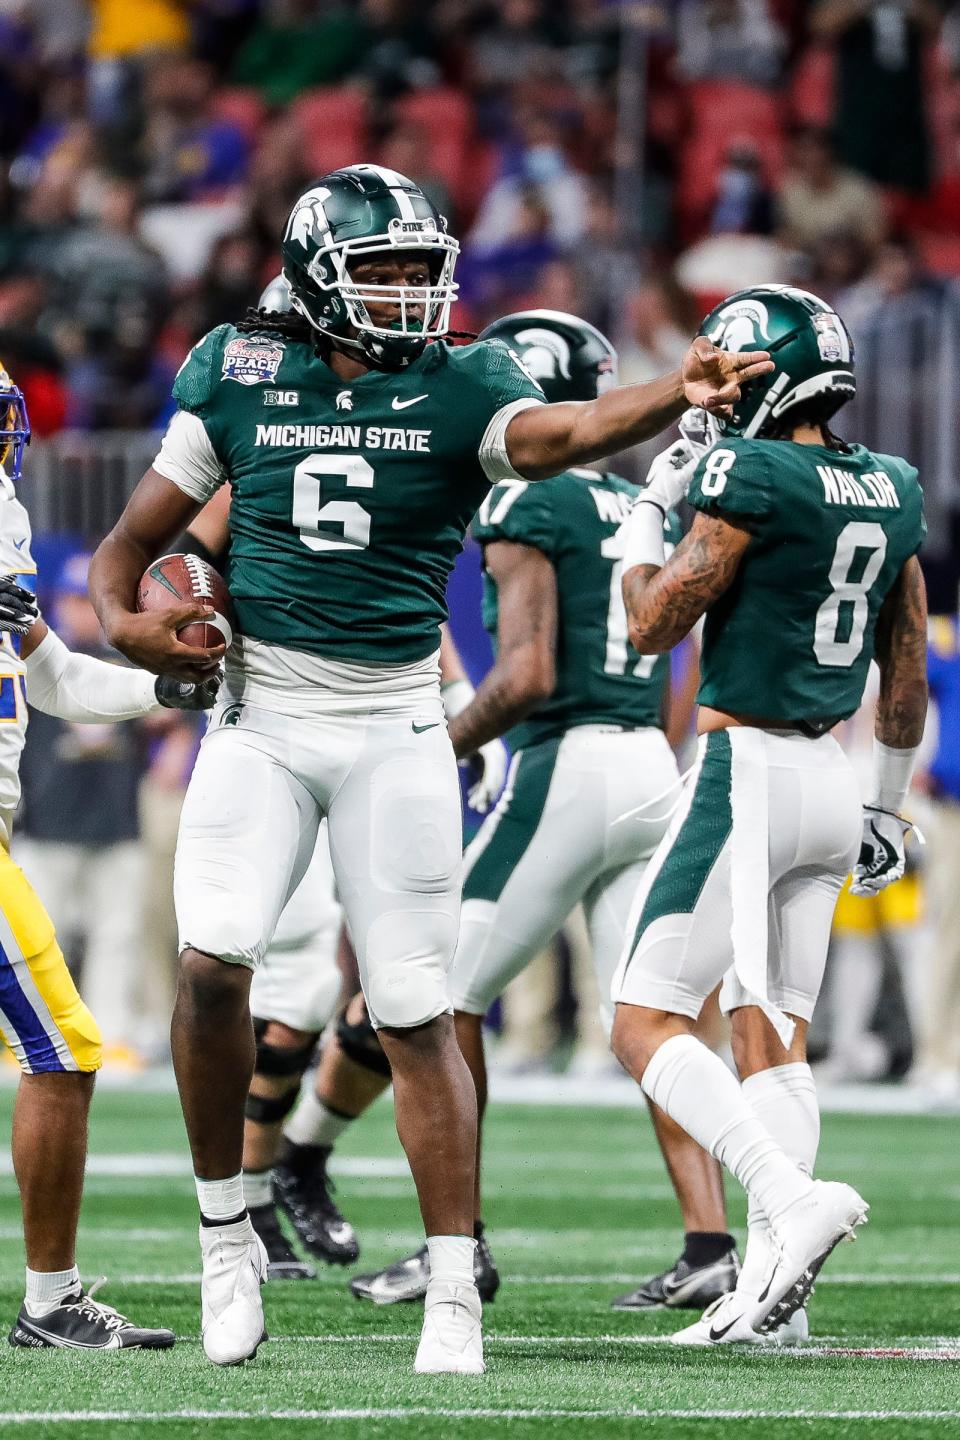 Michigan State tight end Maliq Carr (6) celebrates a first down against Pittsburgh during the first half of the Peach Bowl at the Mercedes-Benz Stadium in Atlanta, Ga. on Thursday, Dec. 30, 2021.